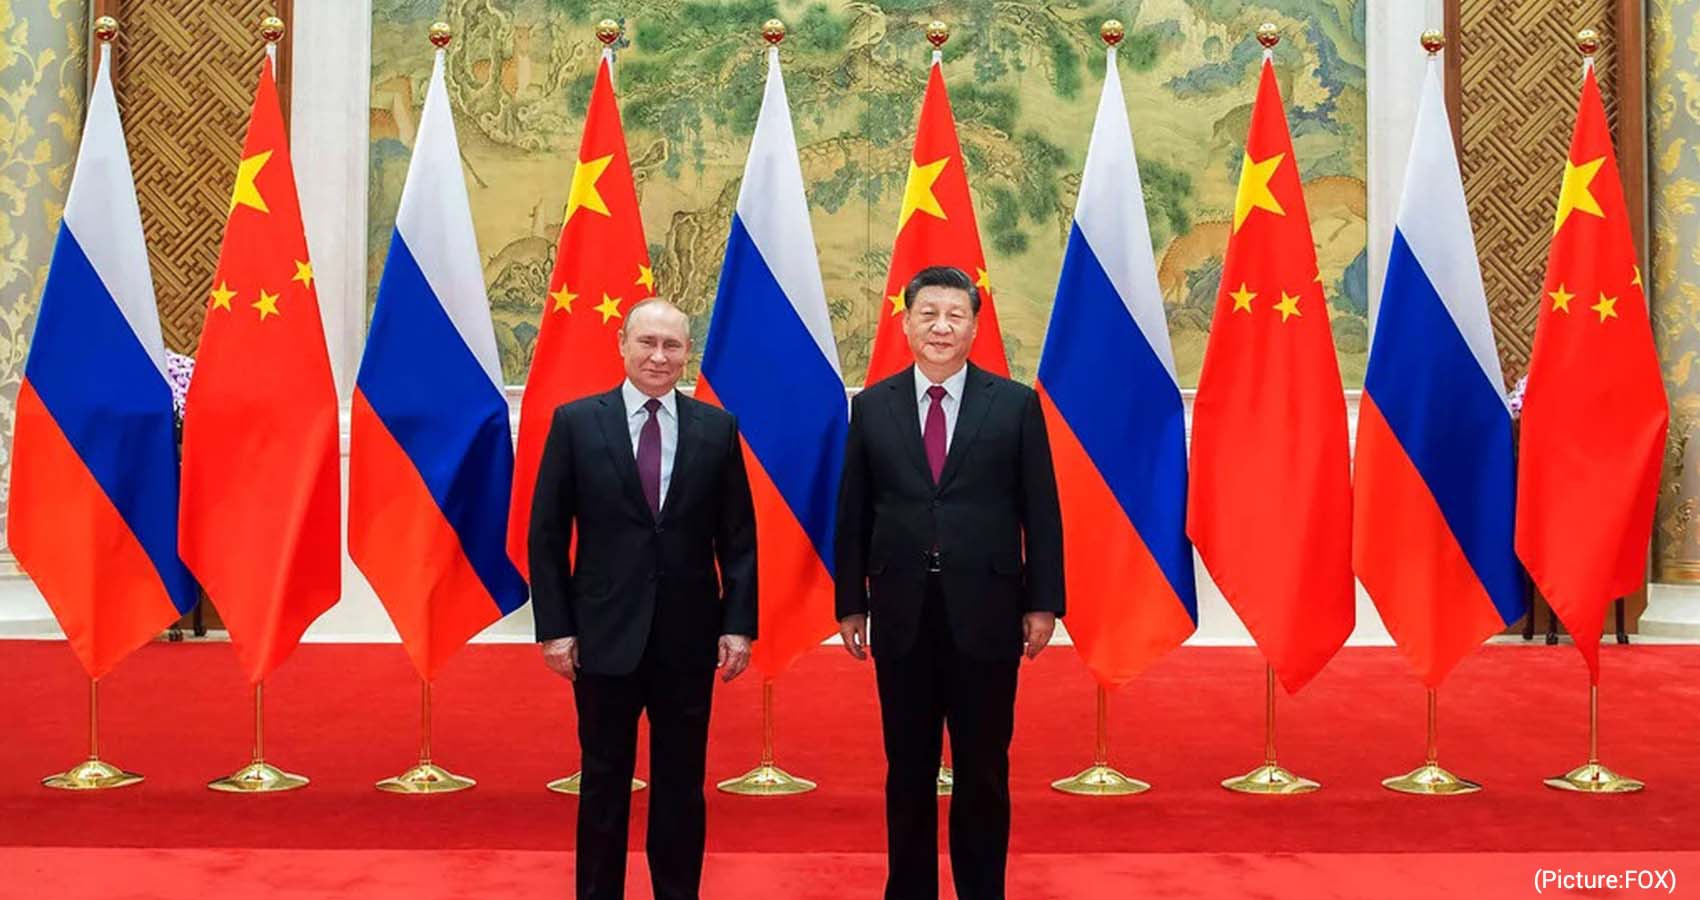 Asia Society’s Kevin Rudd Calls Xi-Putin Meeting As highly Significant